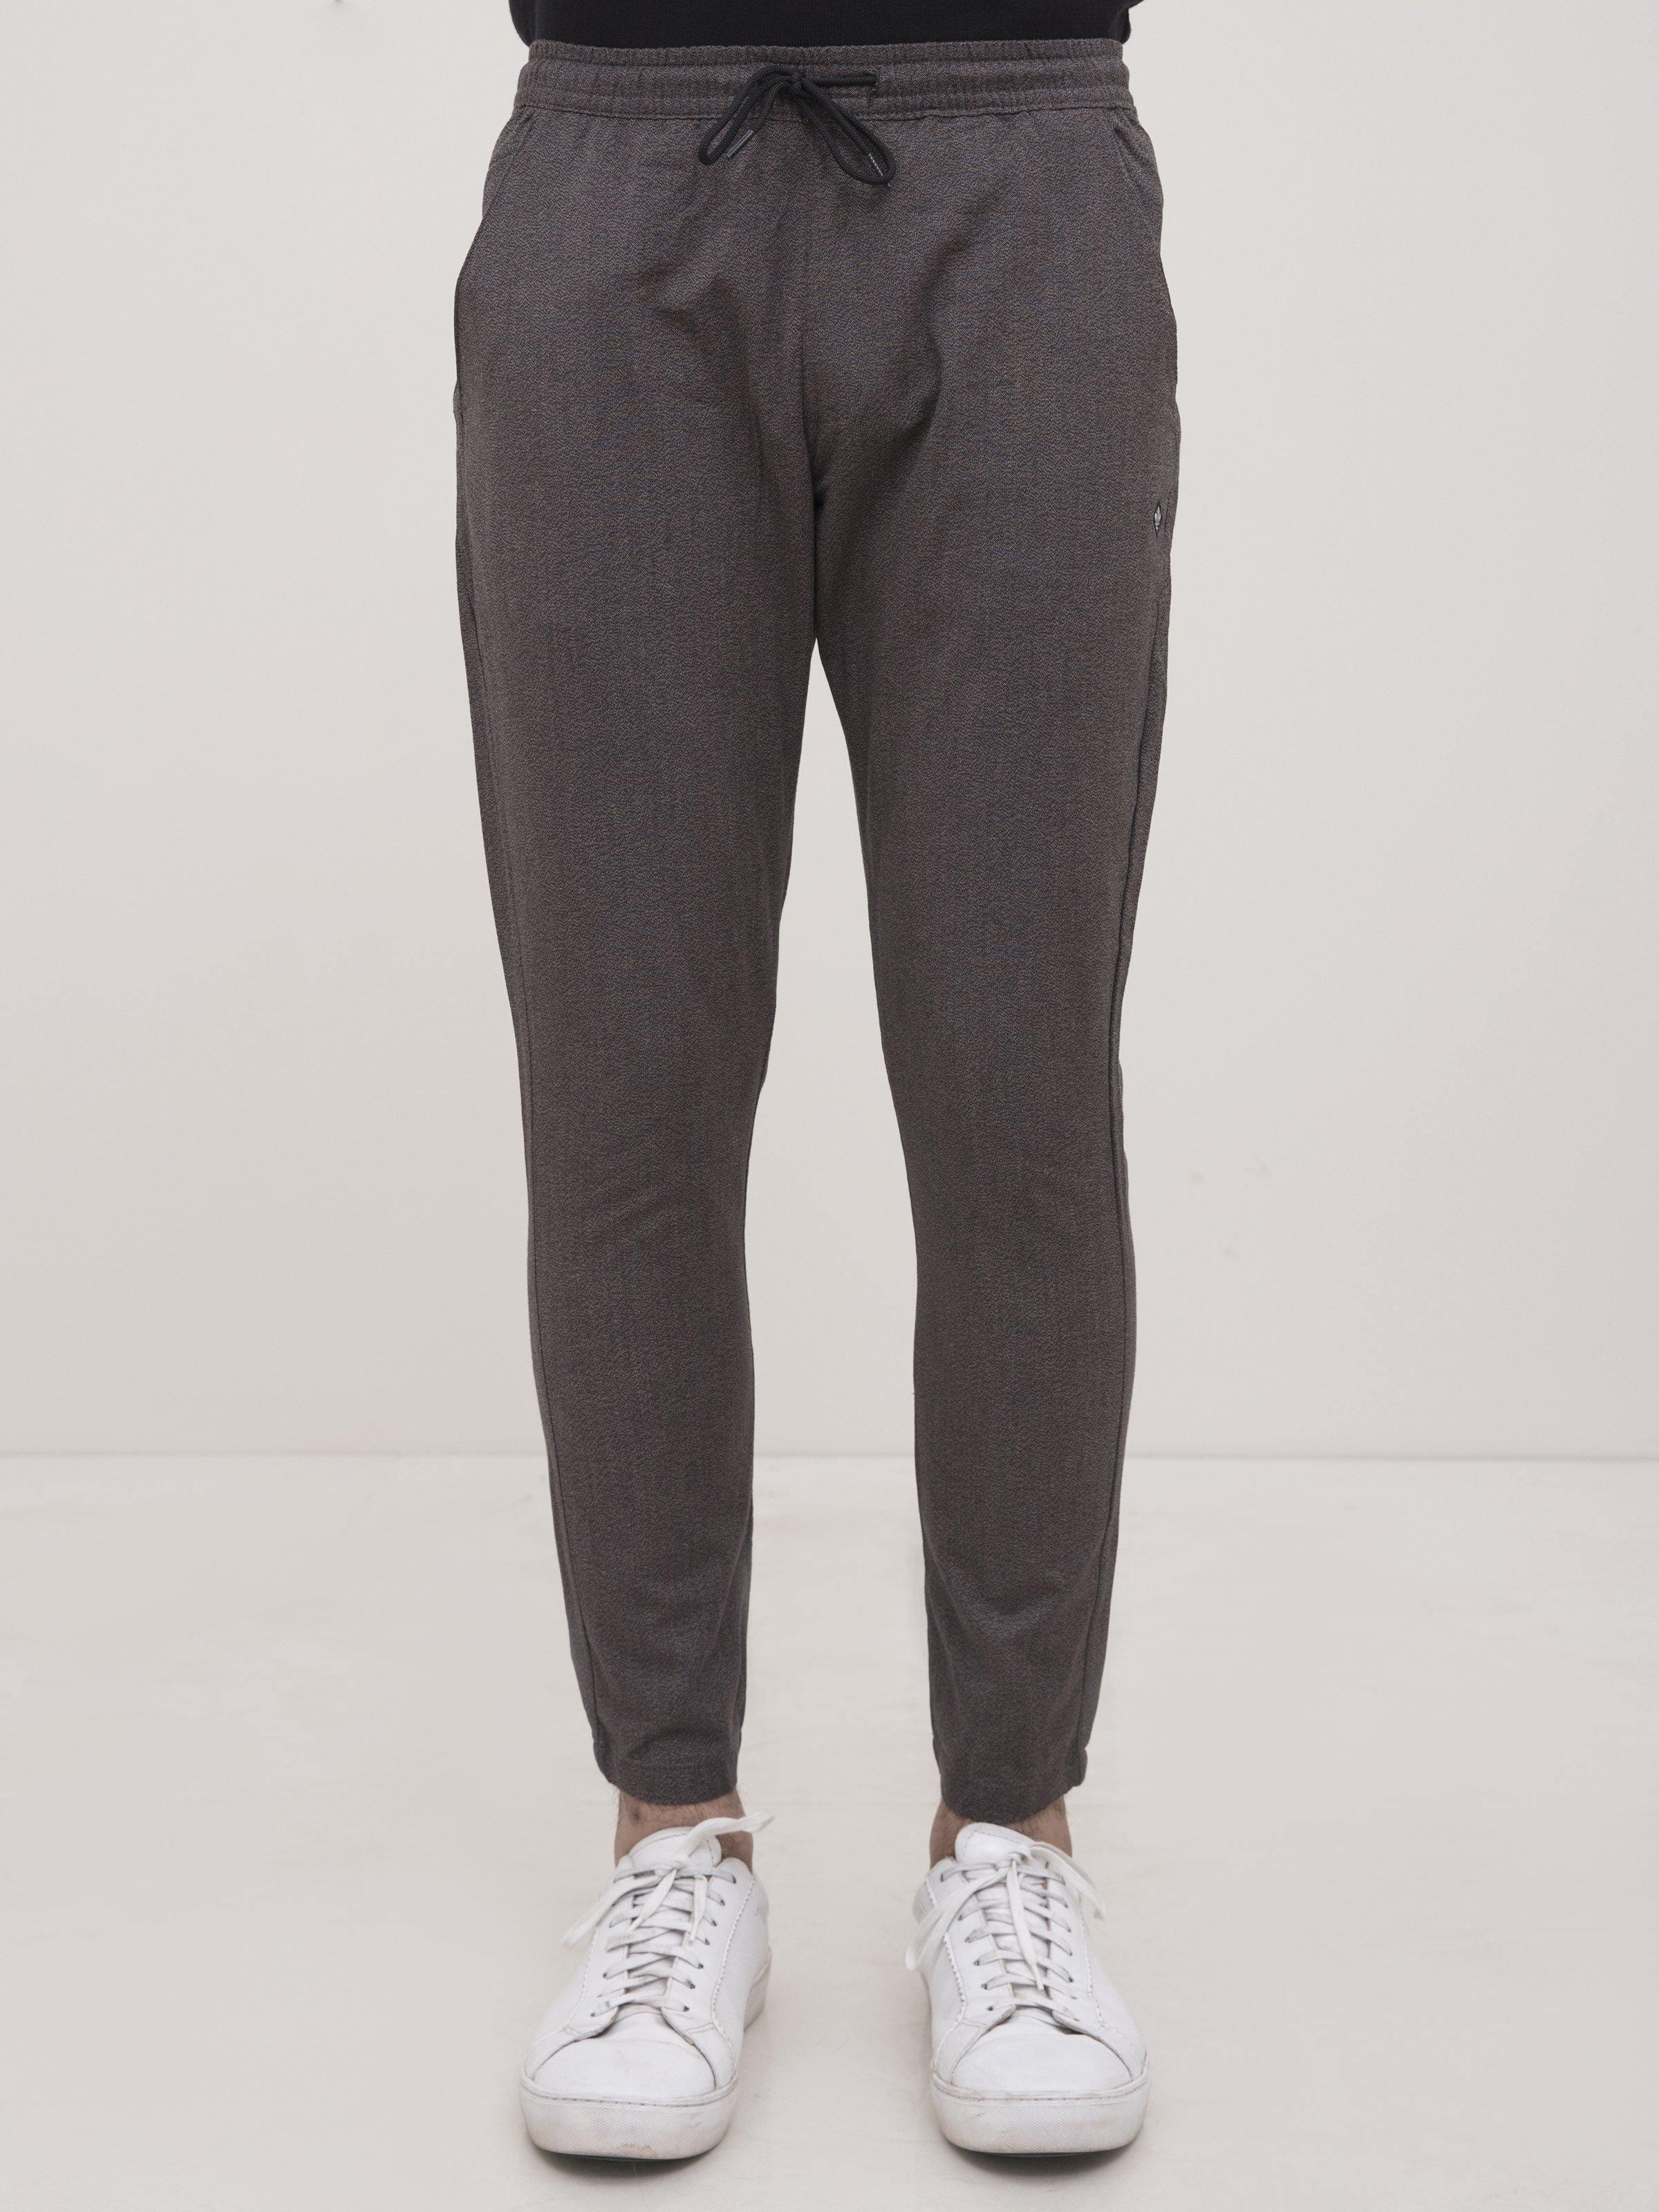 SELF TEXTURED TAPERED FIT TROUSER BLACK KHAKI at Charcoal Clothing